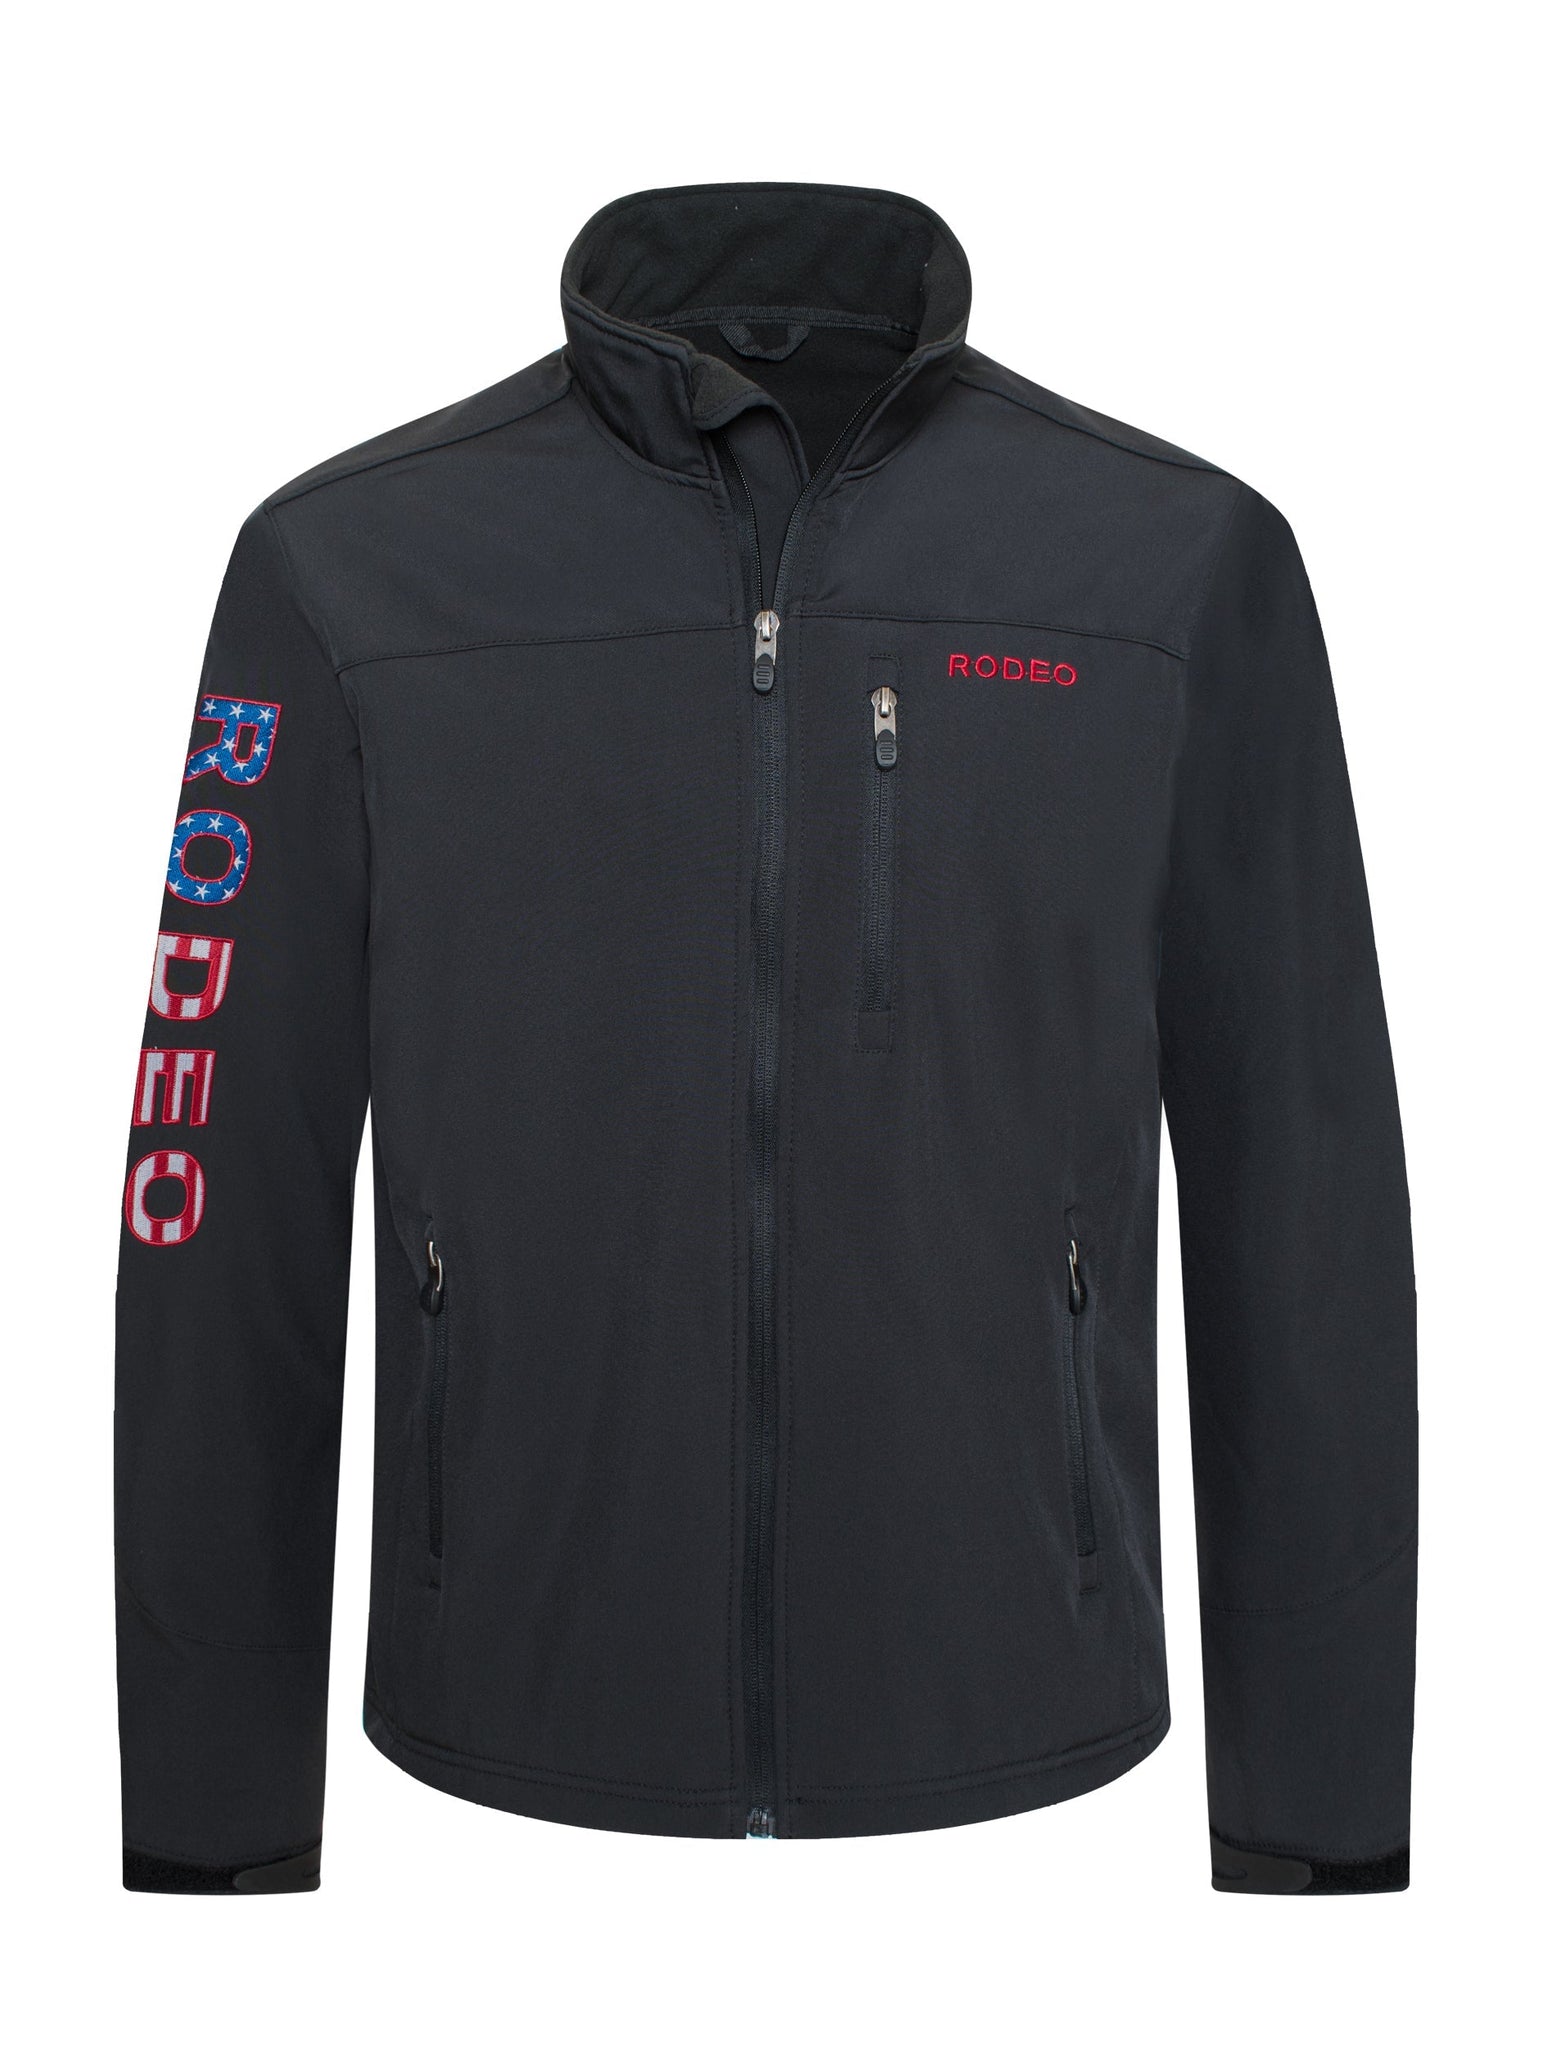 Men's Soft Shell Bonded Jacket With Embroidery-NJ650EMB-BLACK-US